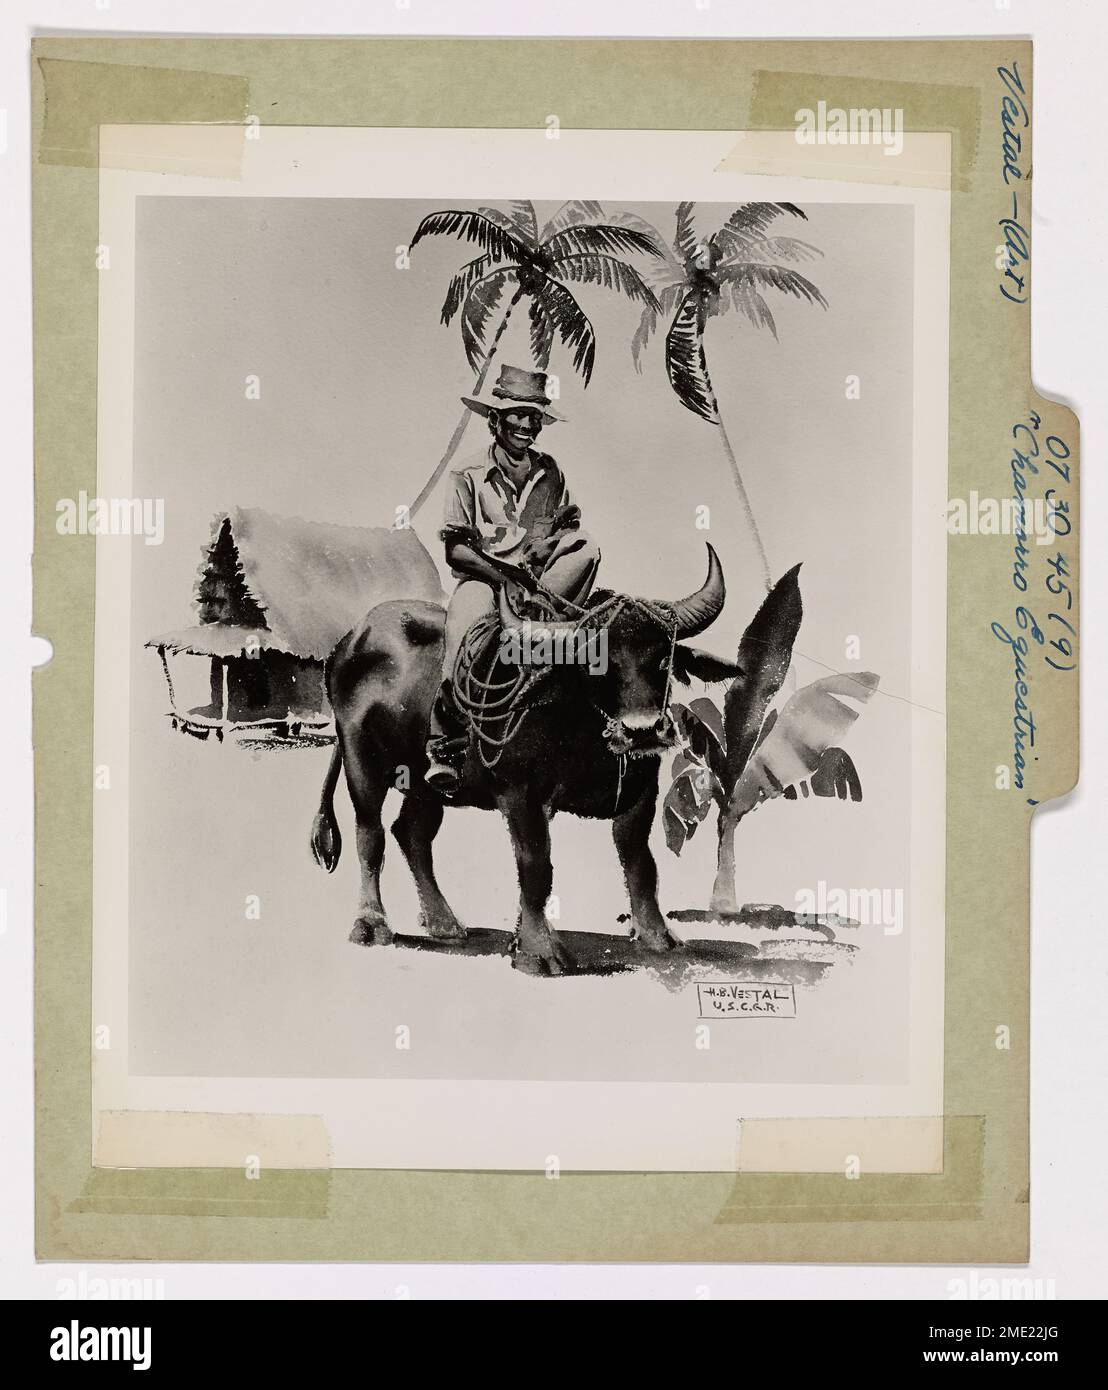 Chamorro Equestrian. This image depicts artwork of a native of Guam showing off his domesticated water buffalo. Artwork by combat artist Herman B. Vestal. Stock Photo